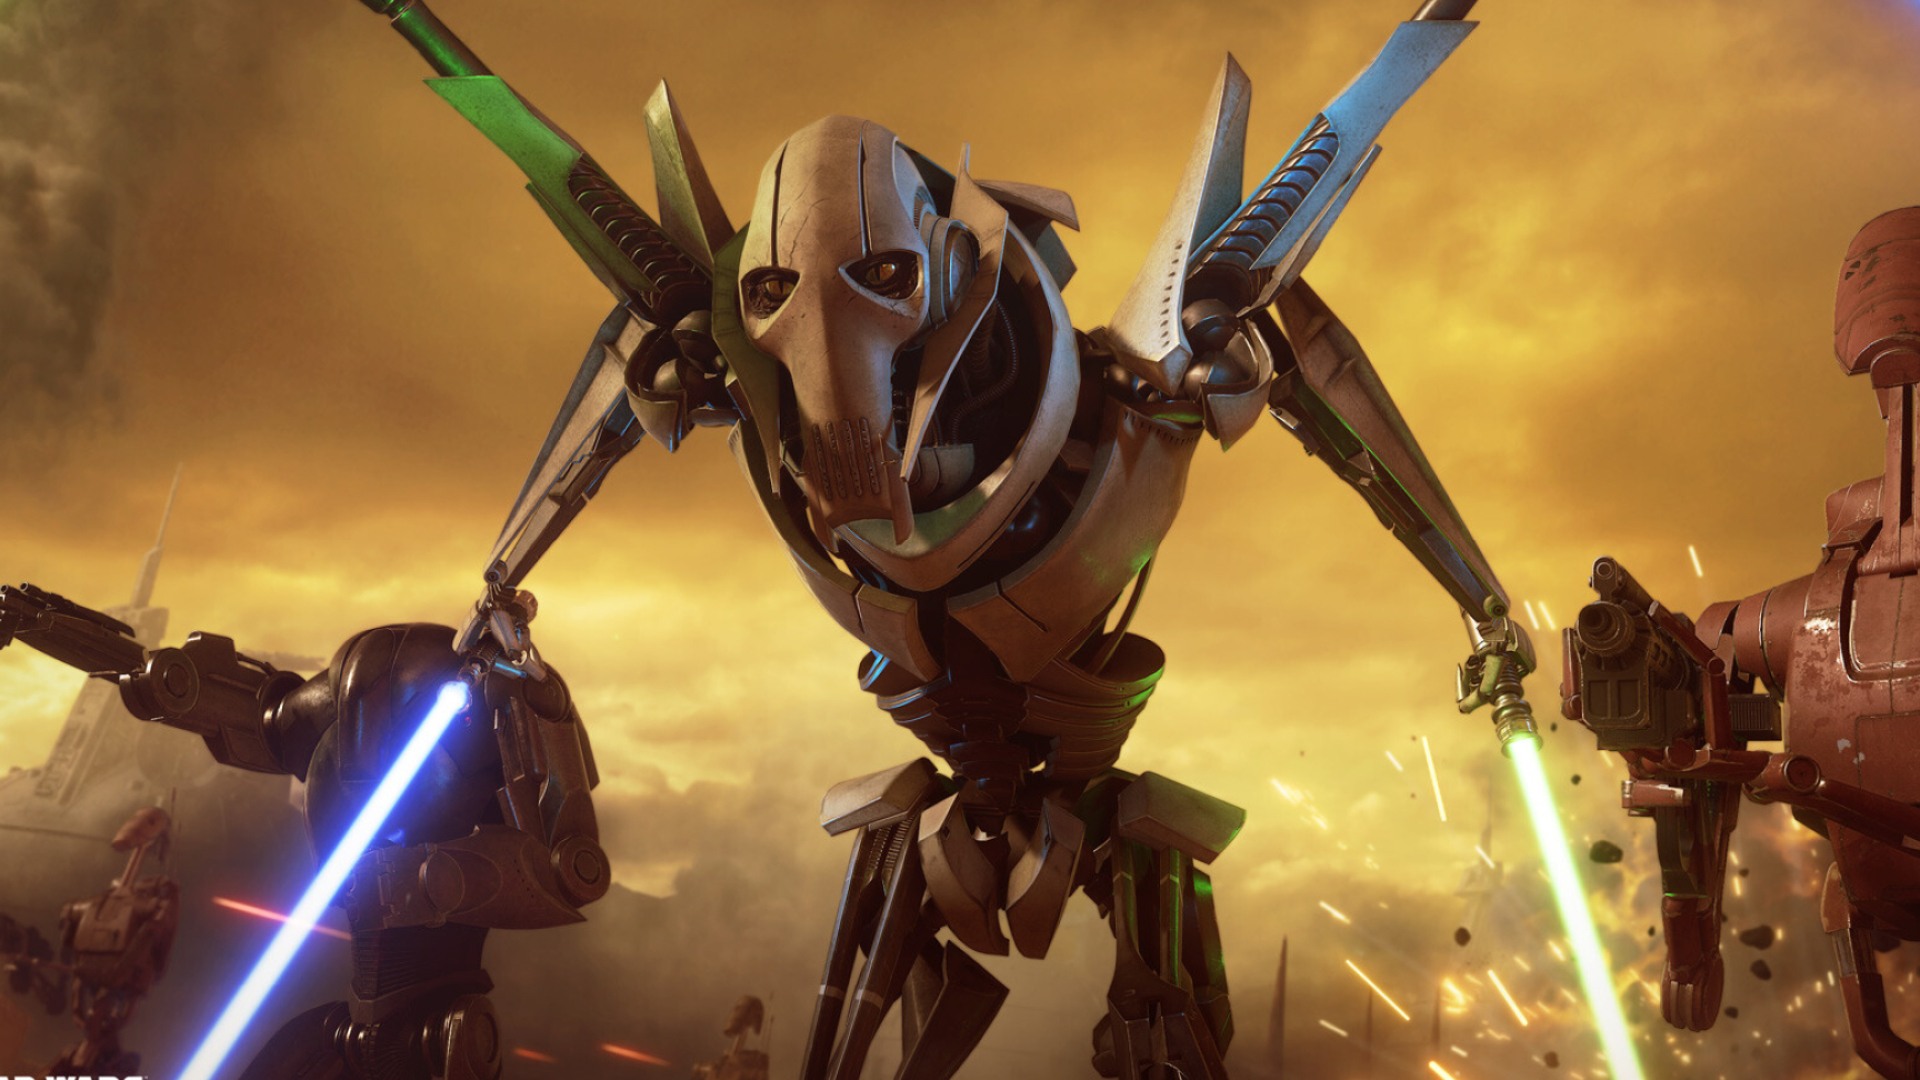 General Grievous: A brilliant Separatist military strategist, A feared Jedi hunter, Known for his ruthlessness and hacking cough. 1920x1080 Full HD Background.